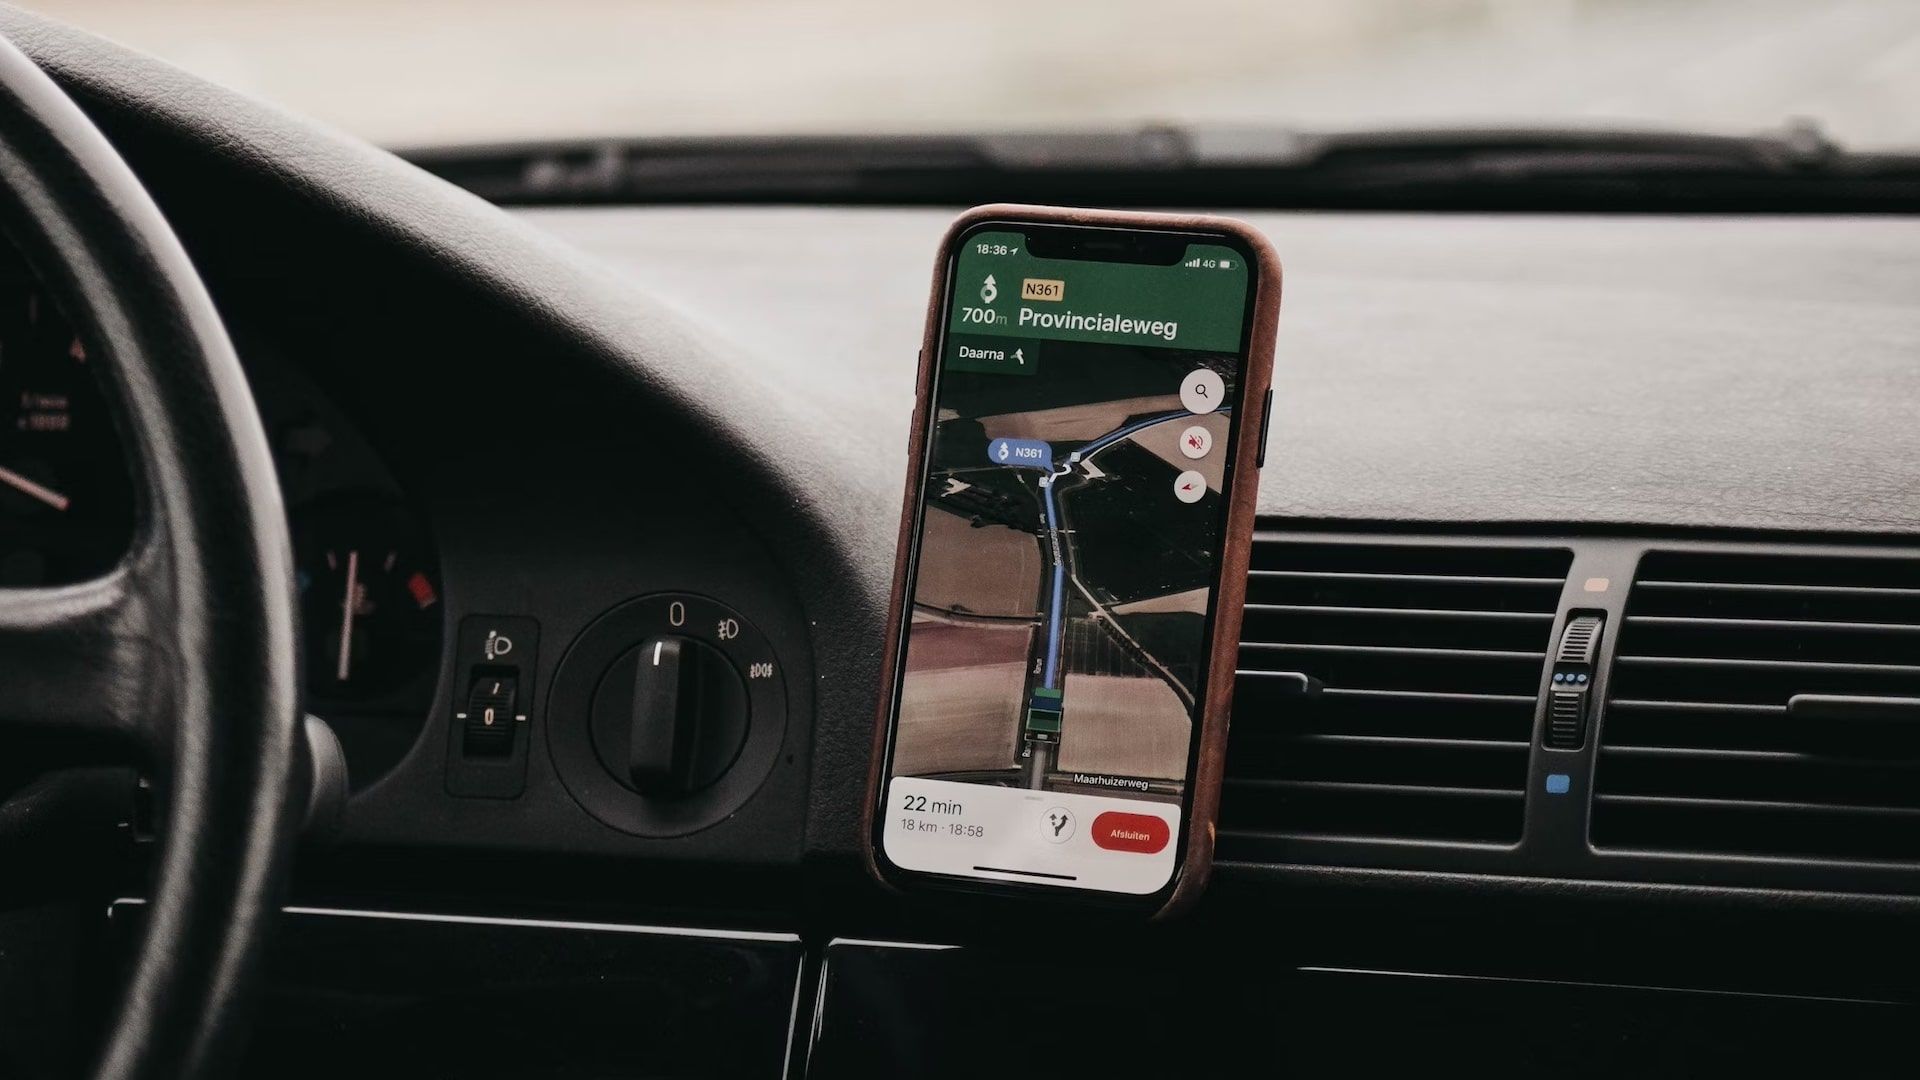 Google Maps on iPhone docked to car dashboard